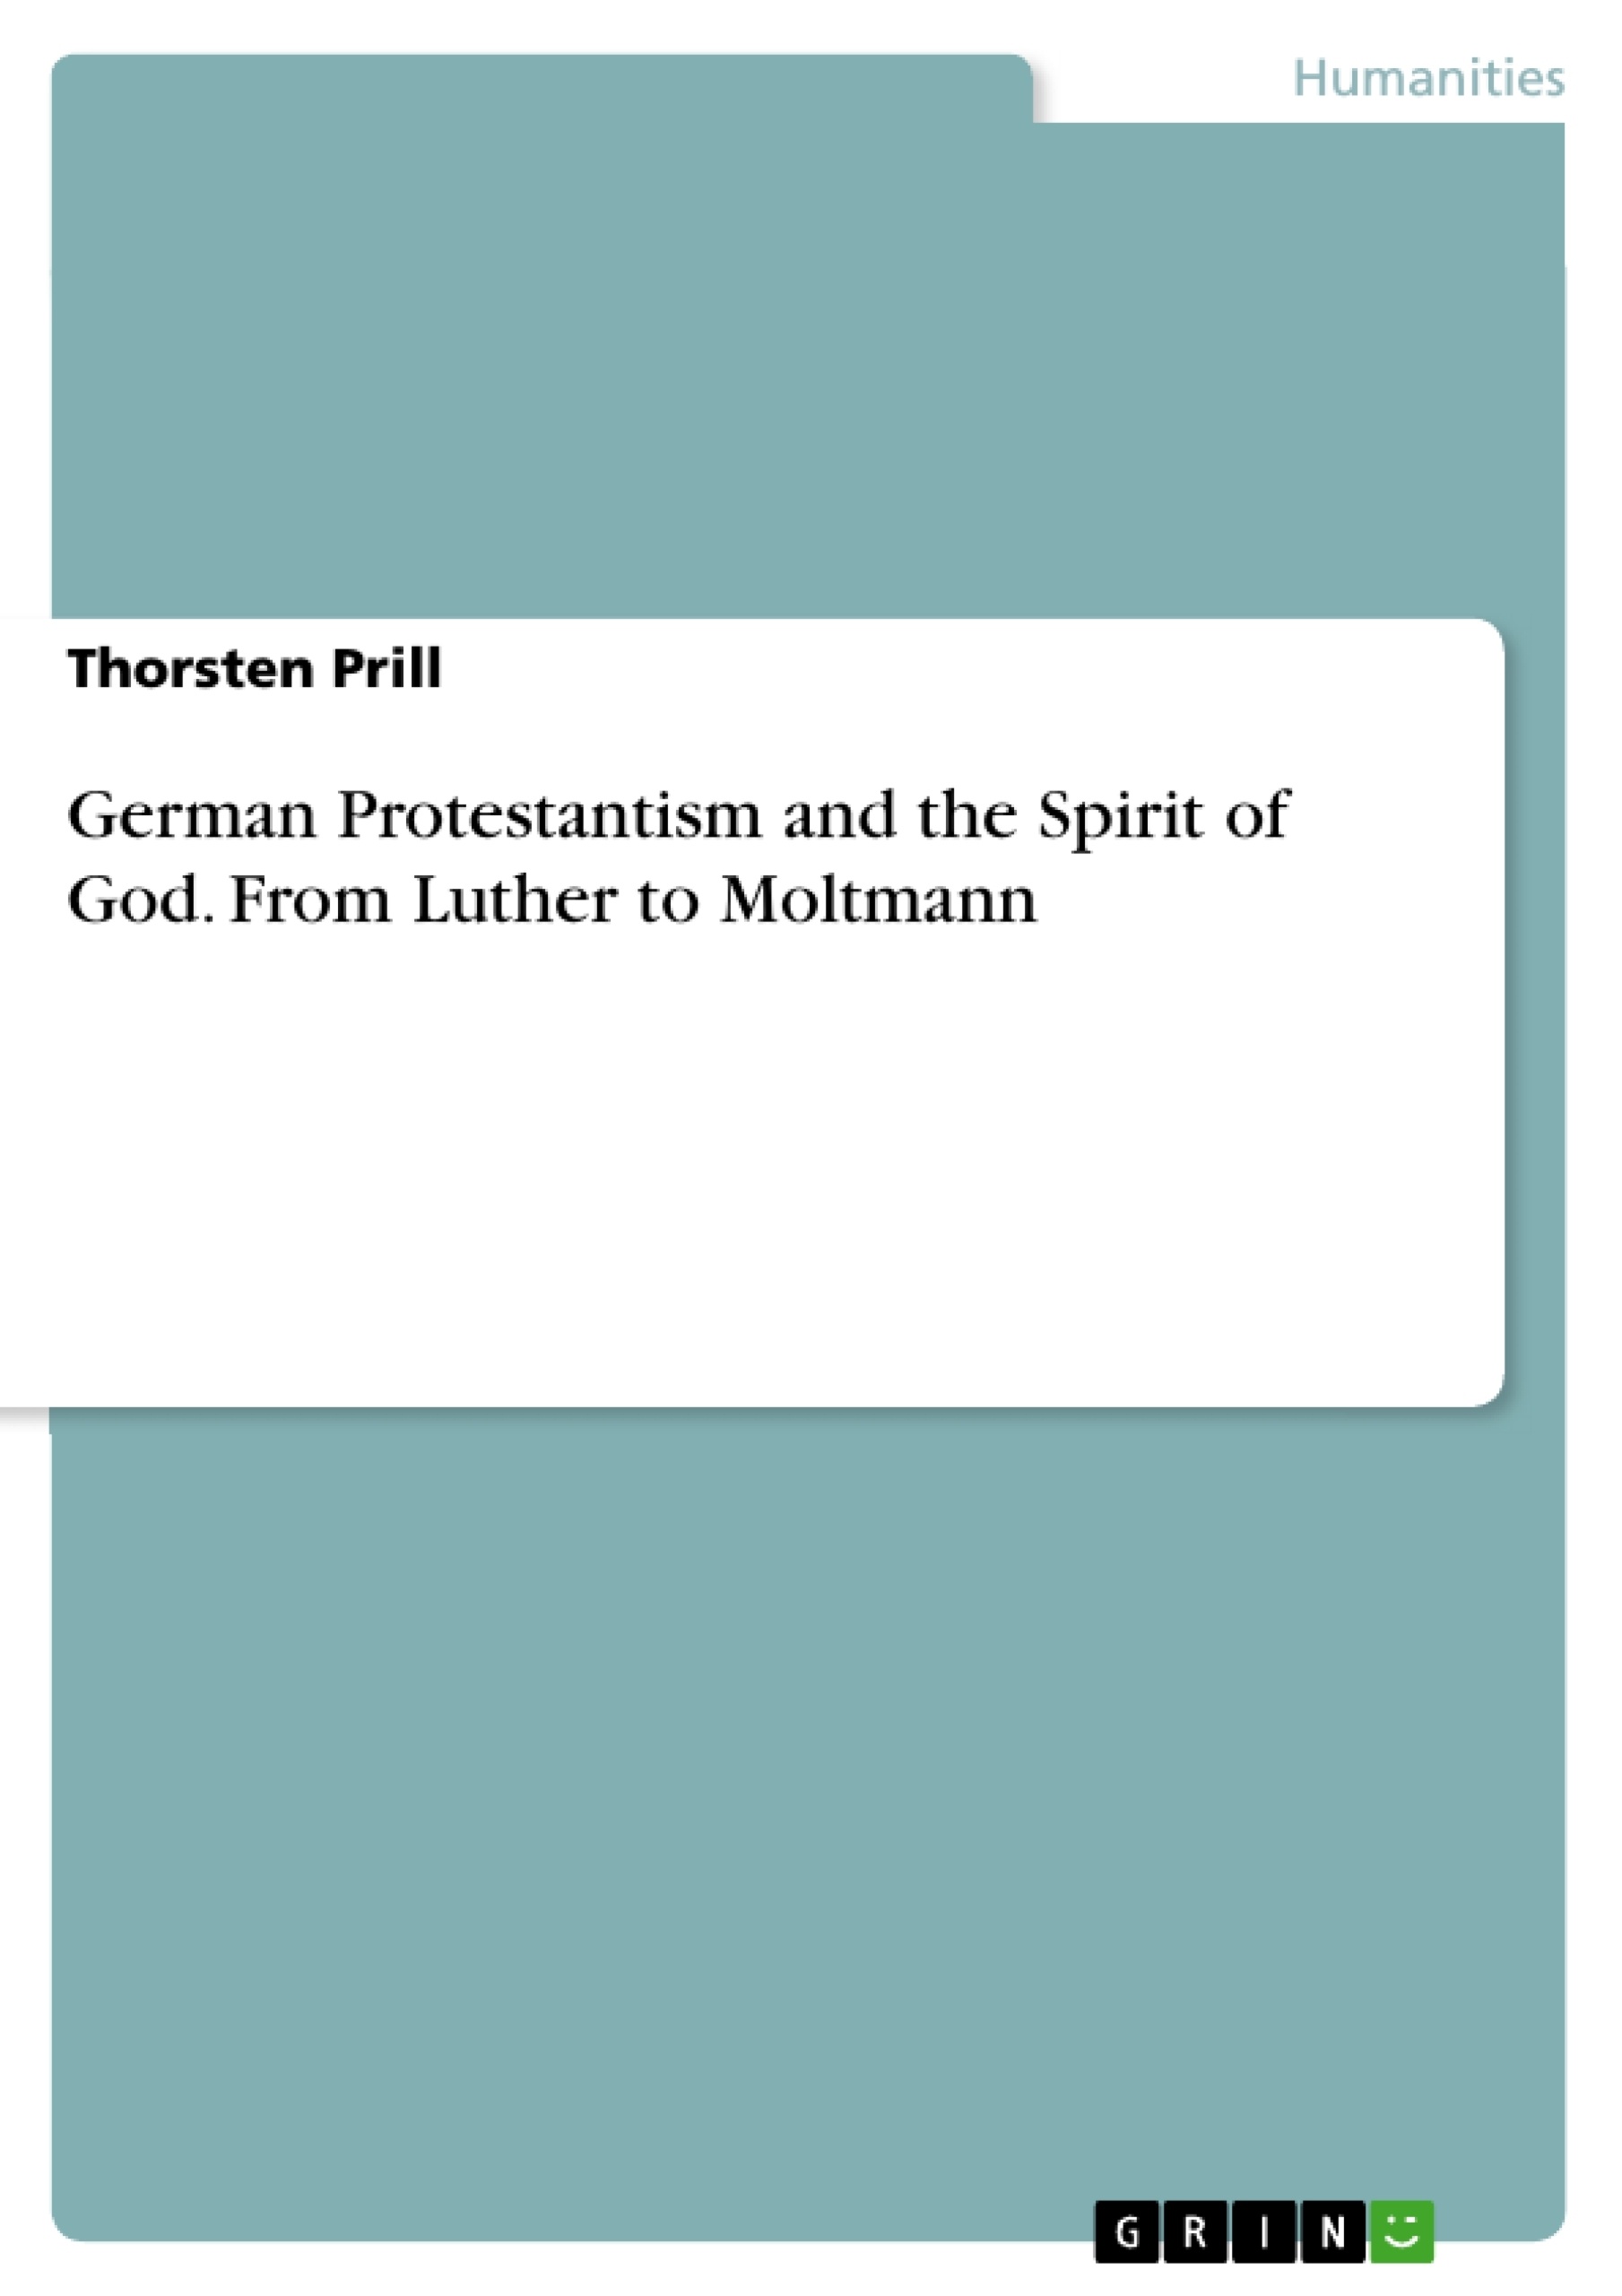 Título: German Protestantism and the Spirit of God. From Luther to Moltmann